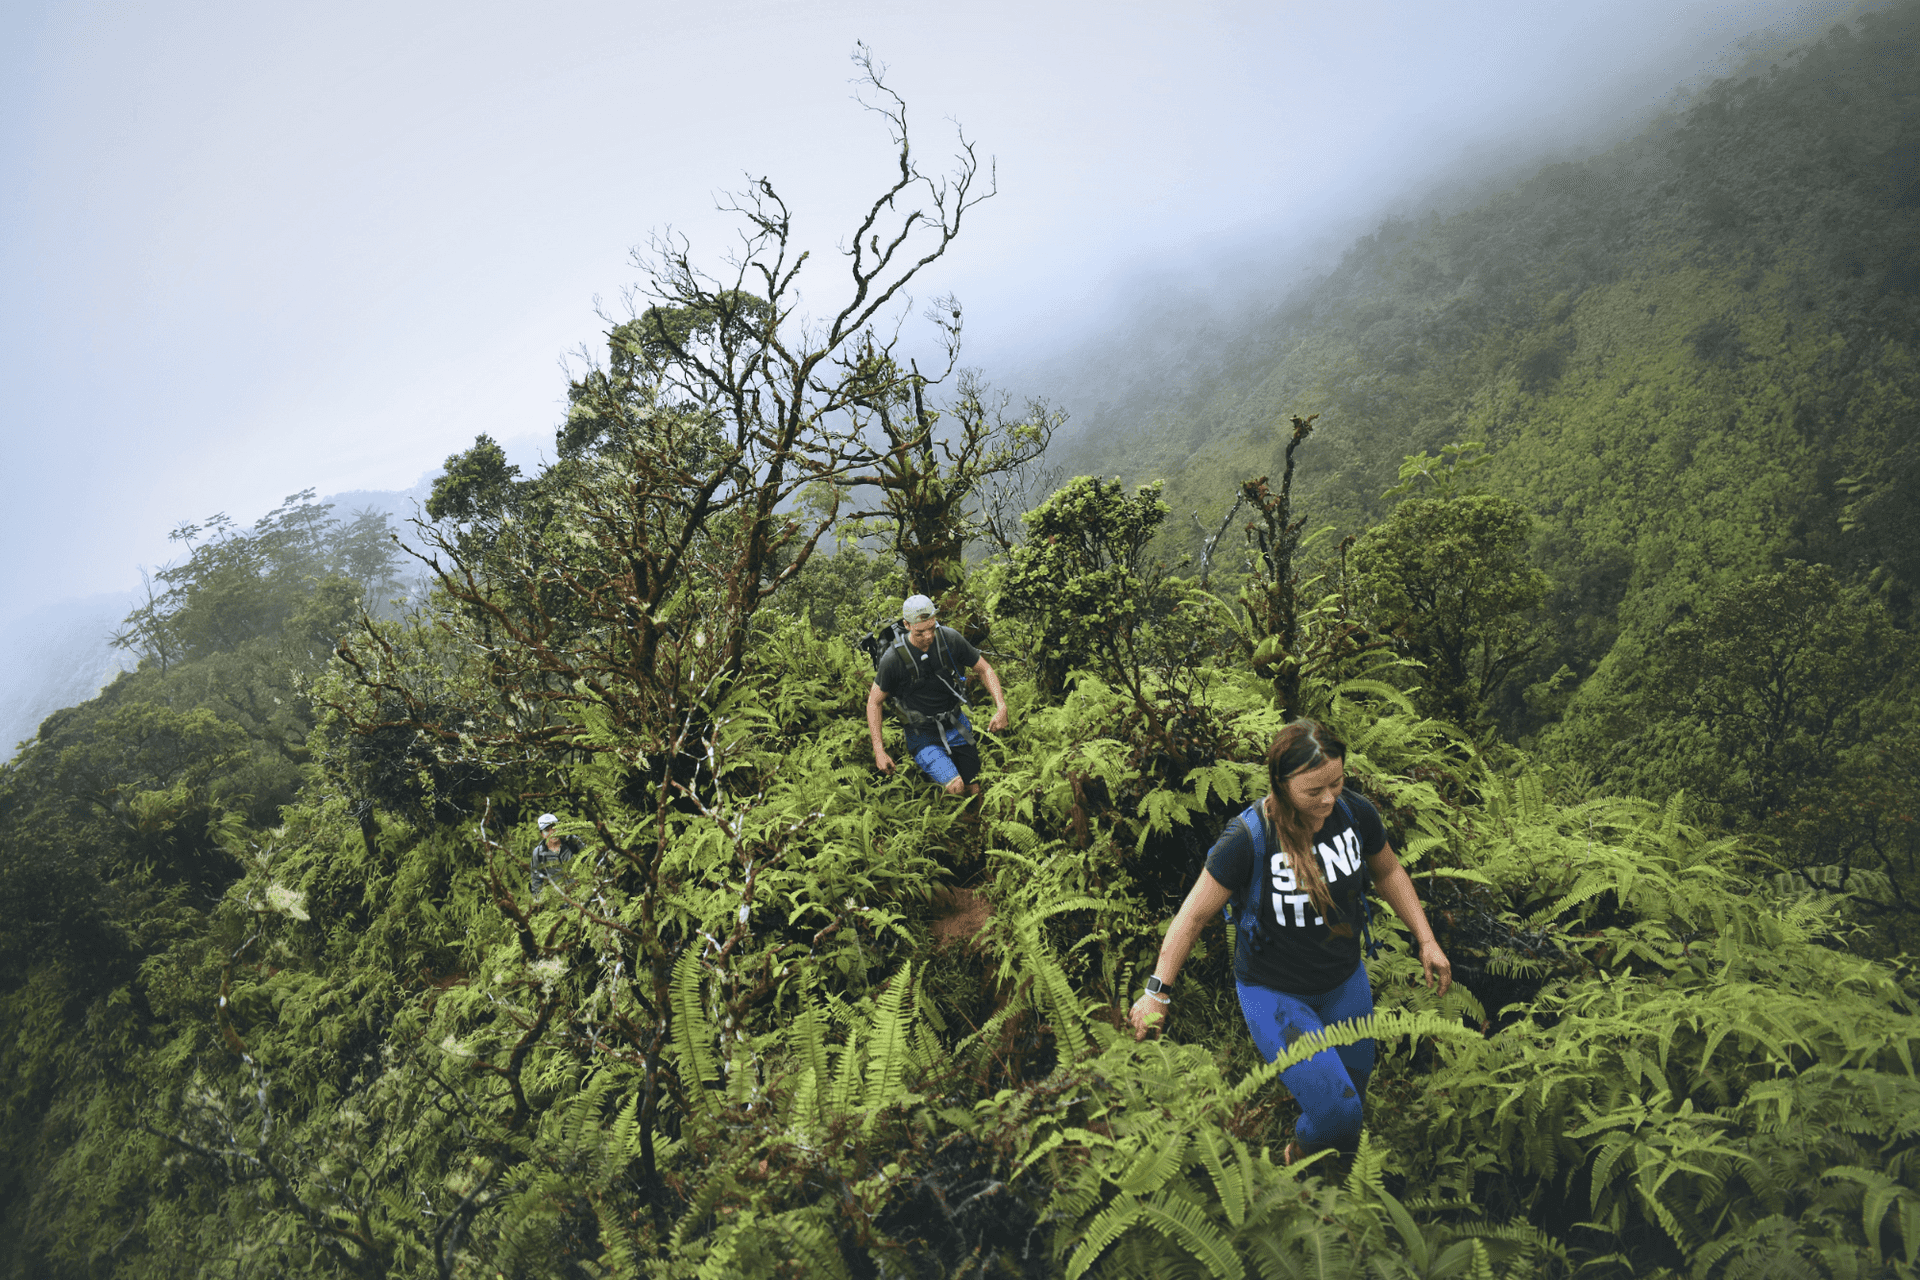 Thanks to Drew Farwell for this snap of hikers deep in the brush on a ridge hike in Hawaii. You would definitely want to bring your rain jacket for this one!